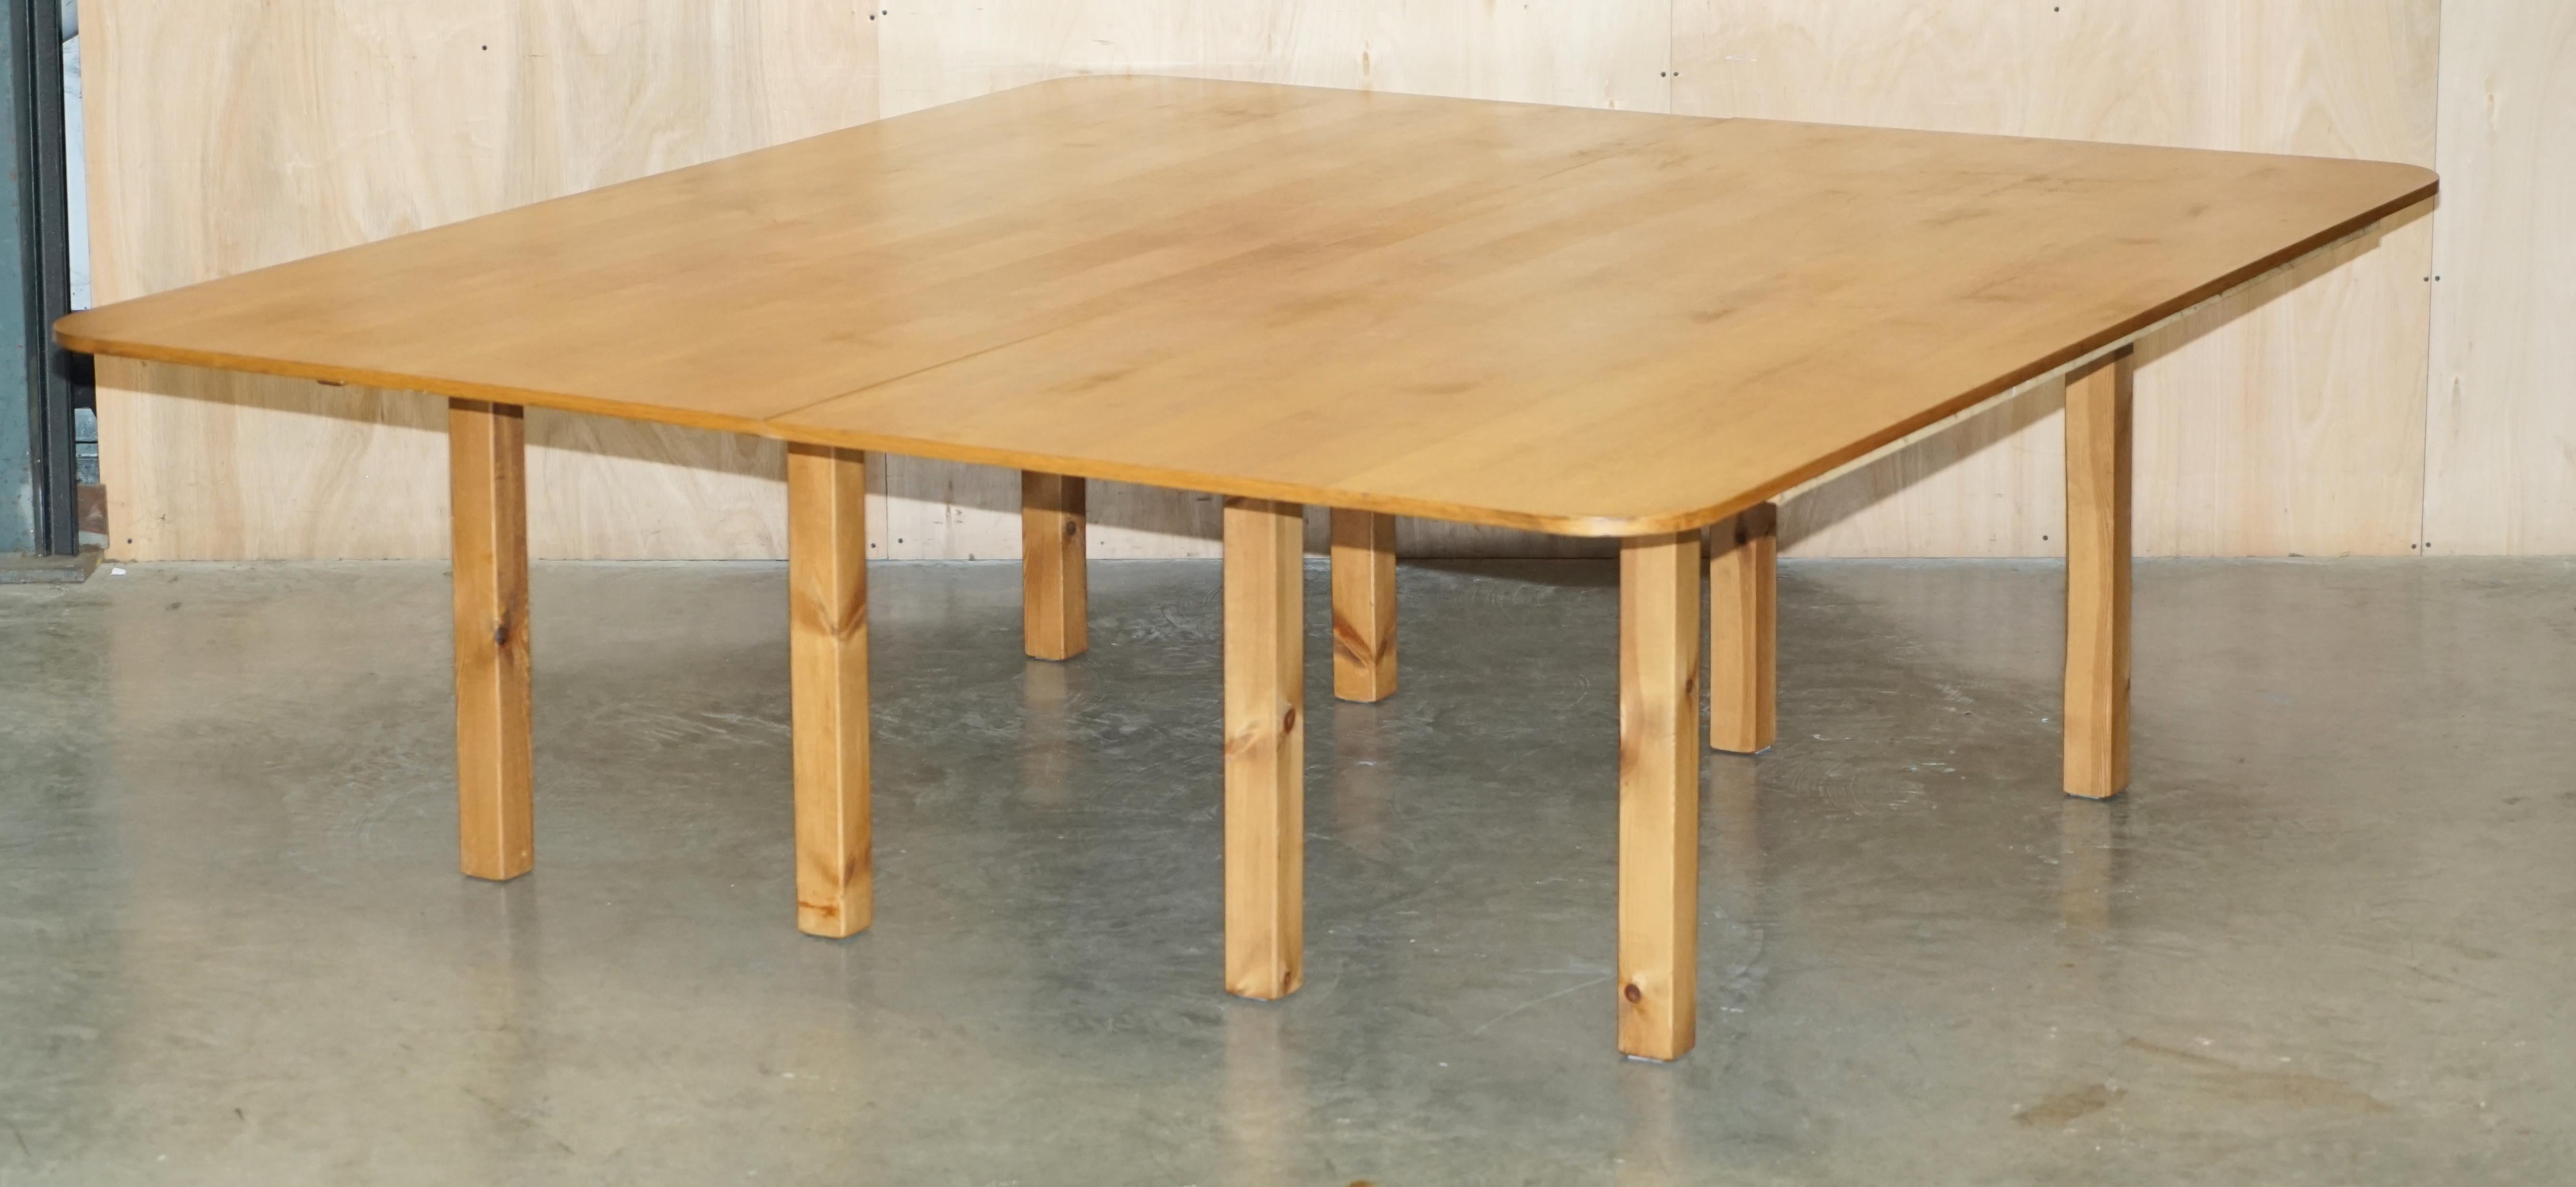 Royal House Antiques

Royal House Antiques is delighted to offer for sale this very unique and large workshop or dining table in hardwood

Please note the delivery fee listed is just a guide, it covers within the M25 only for the UK and local Europe